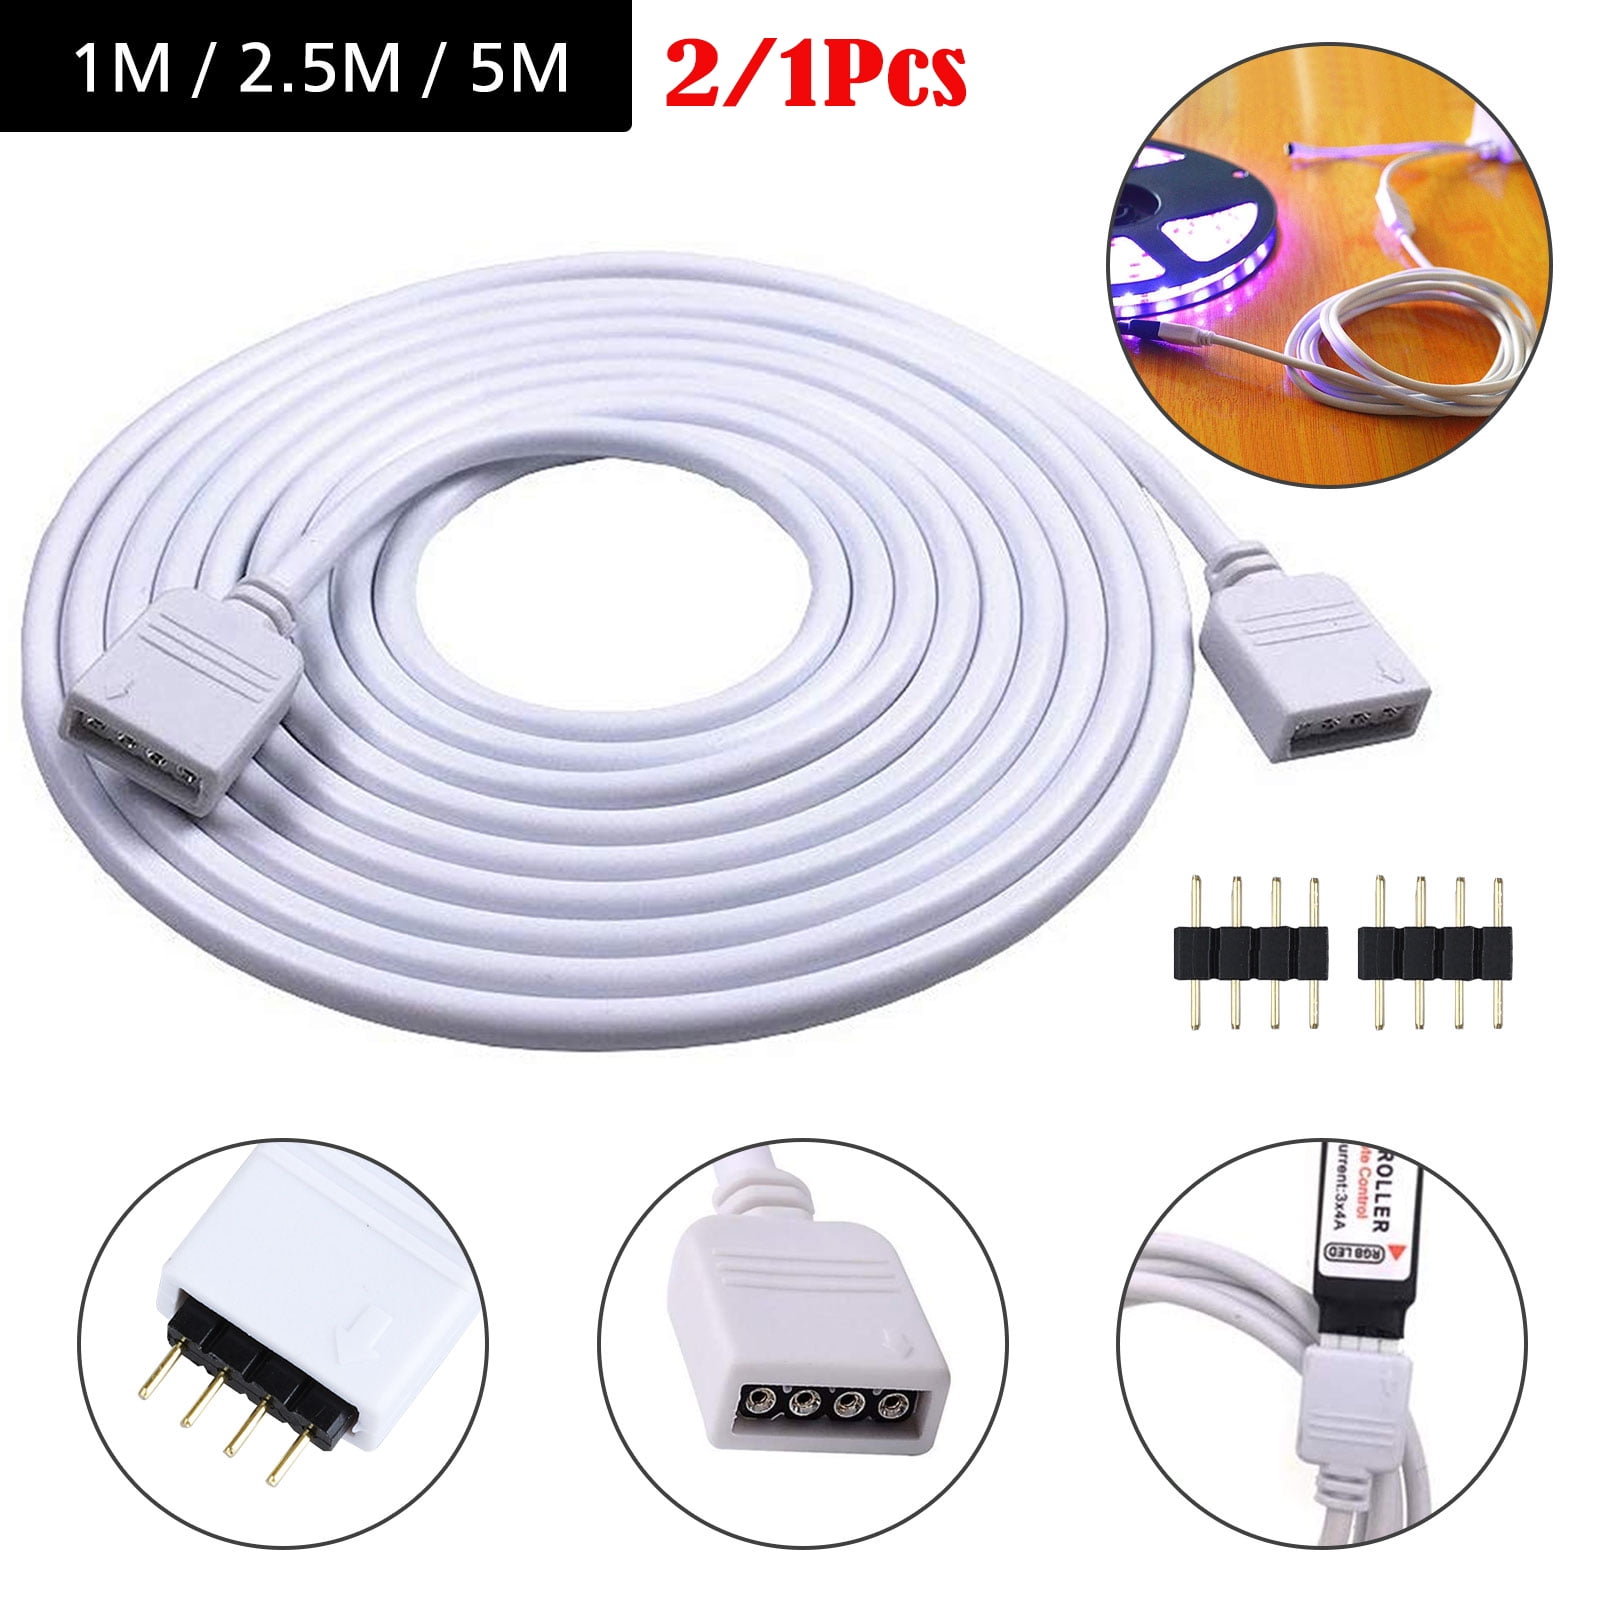 2.5M 4-Pin Extension Connector Wire Cable Cord For RGB 5050 3528 LED Strip 